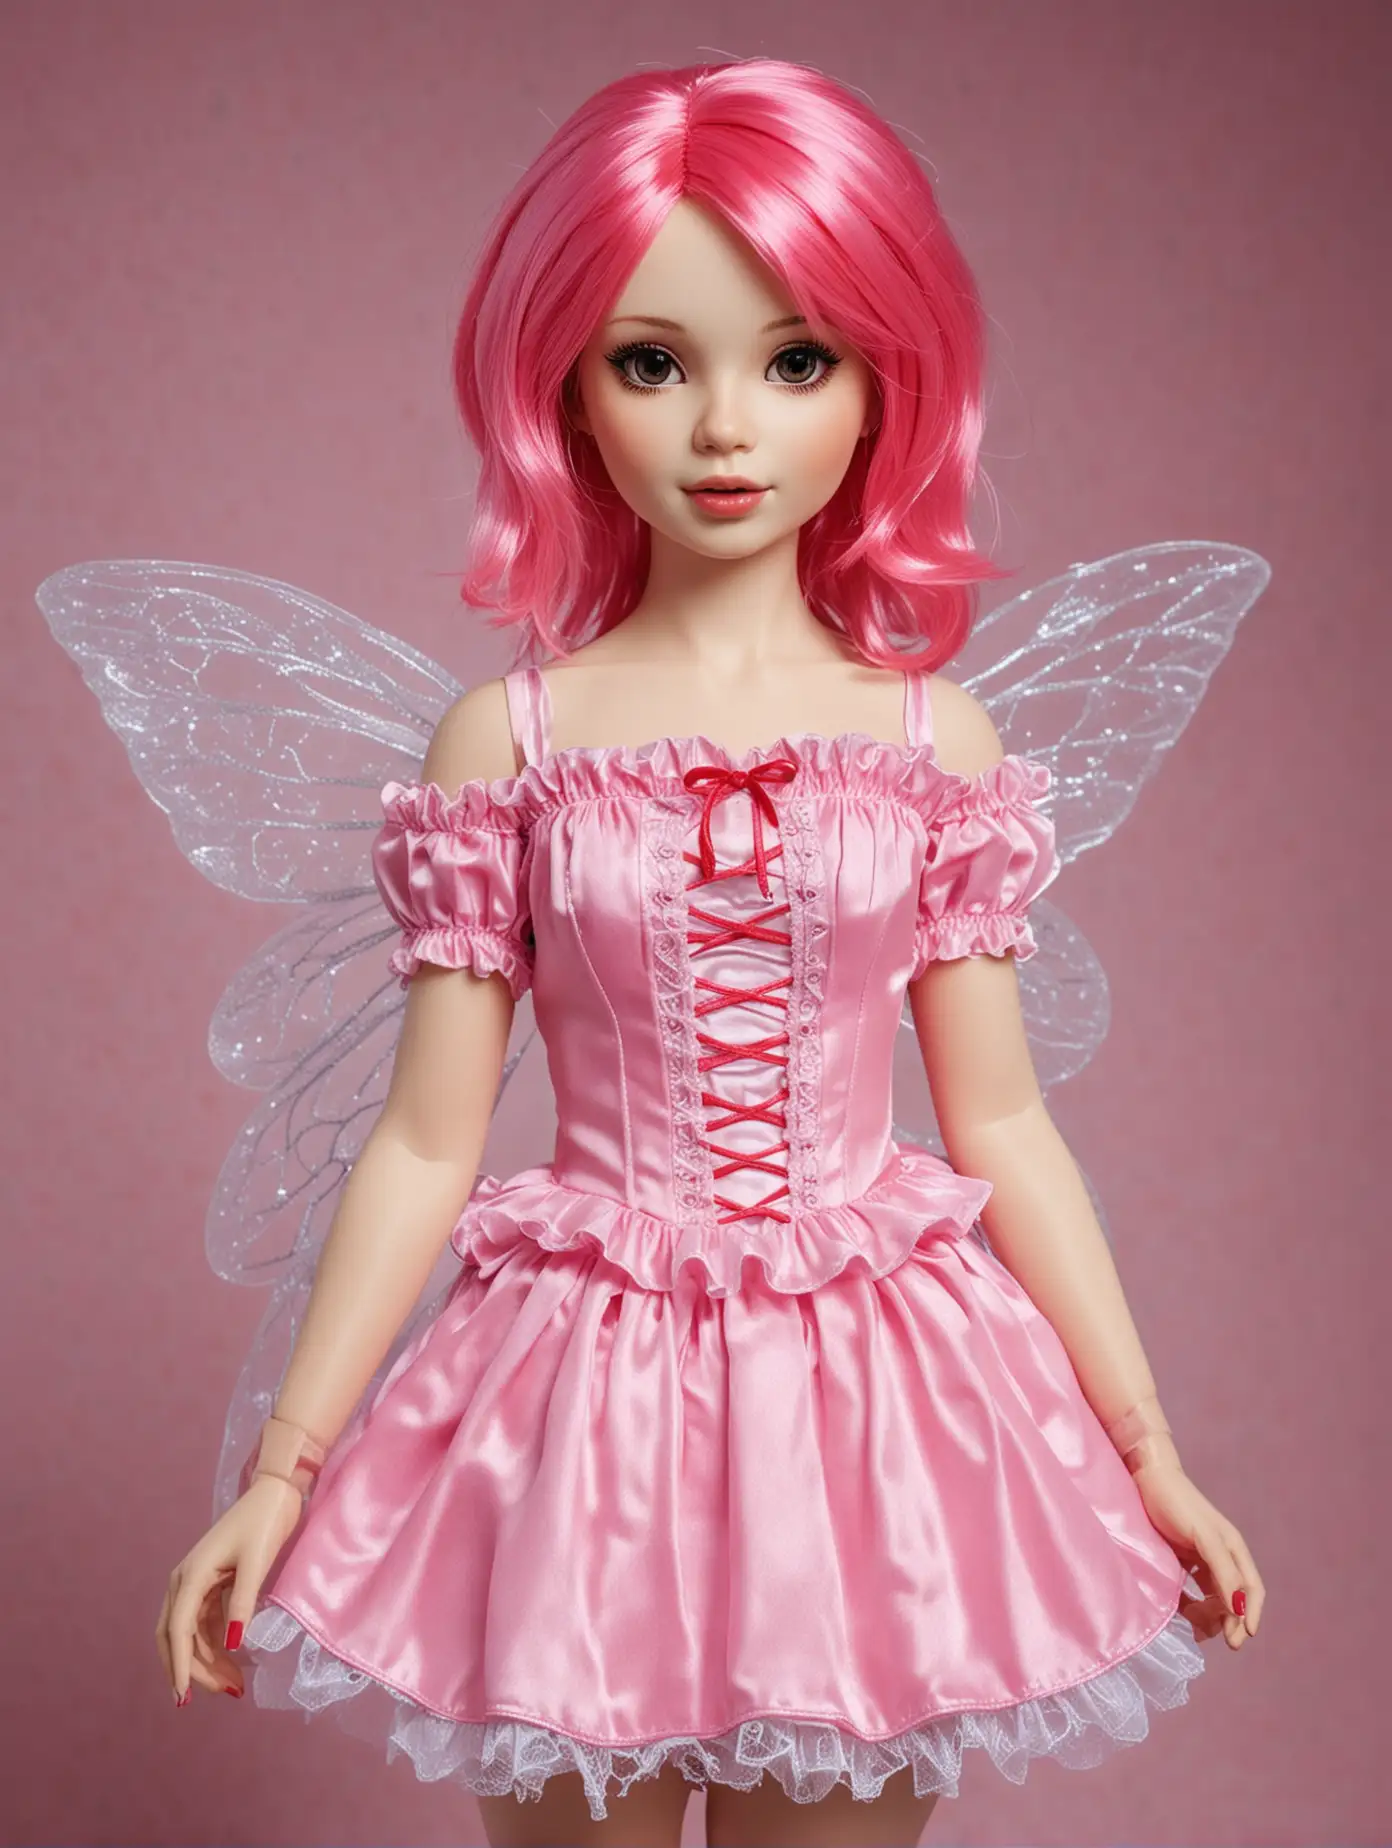 Elegant Teenage Doll in Fairy Costume with Pink Hair and Red Shoes